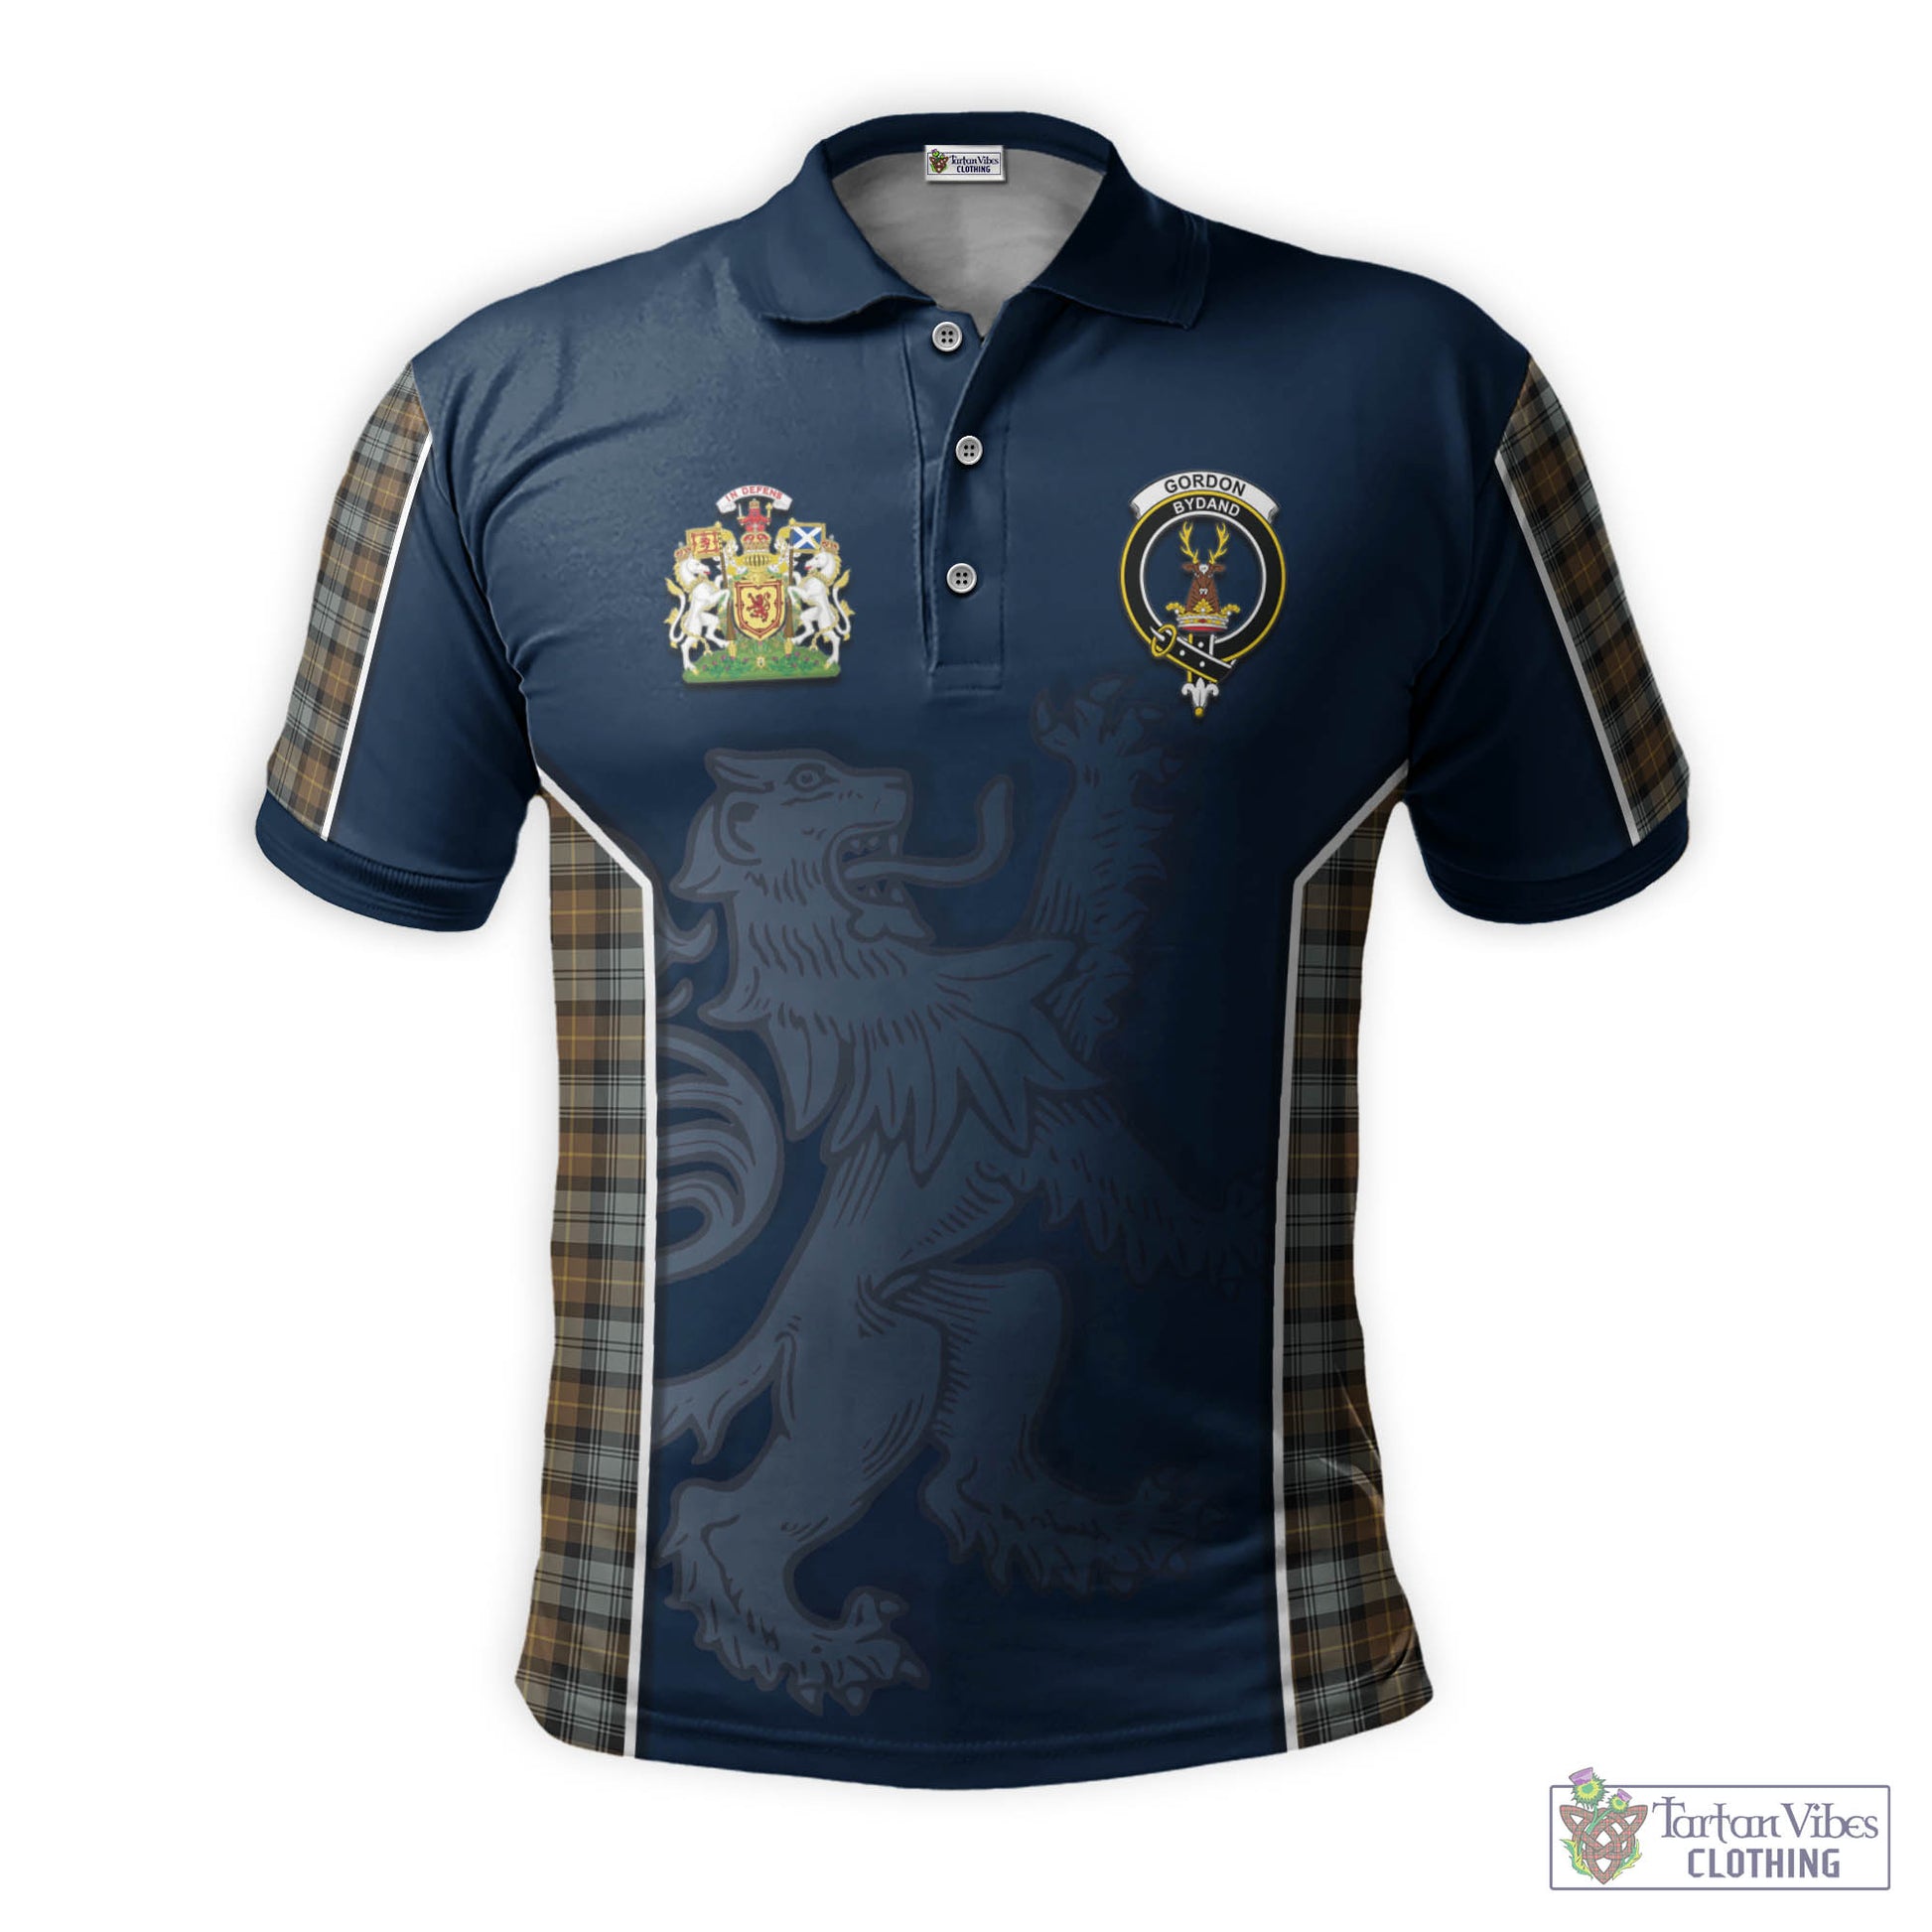 Tartan Vibes Clothing Gordon Weathered Tartan Men's Polo Shirt with Family Crest and Lion Rampant Vibes Sport Style